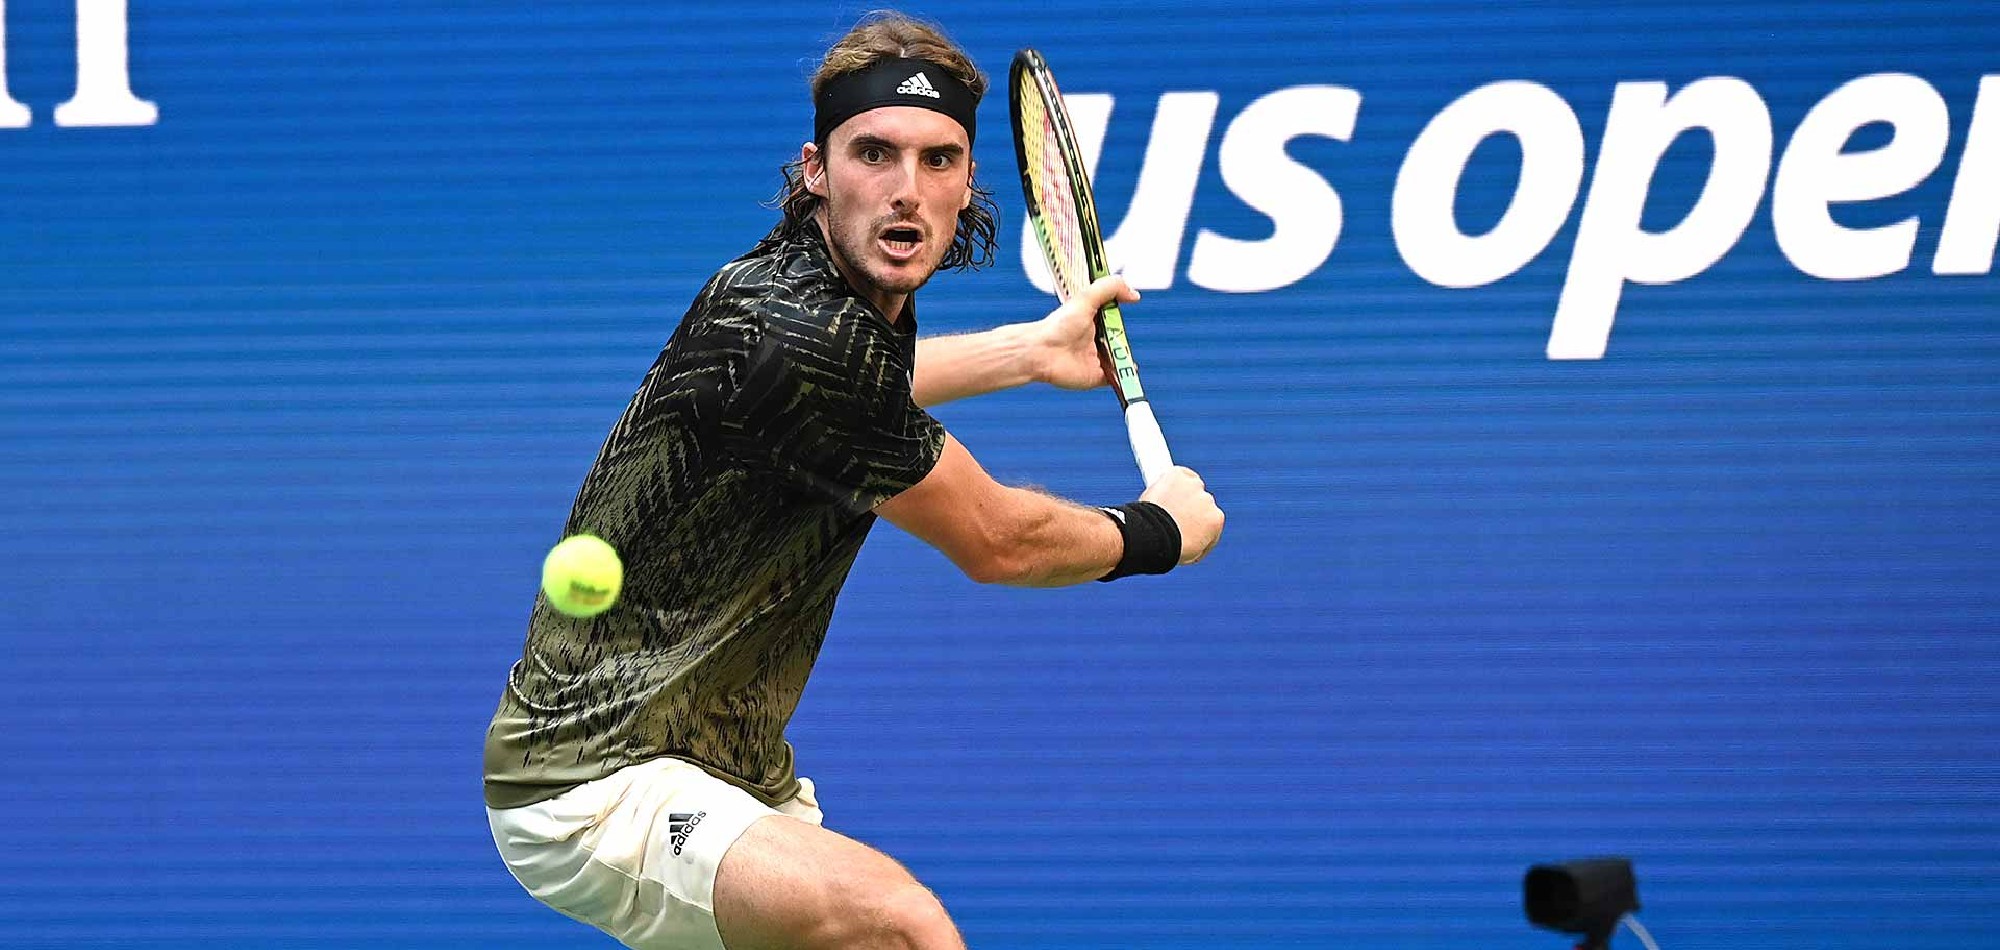 Tsitsipas fired a career-high of 27 aces to secure a second-round win at the US Open